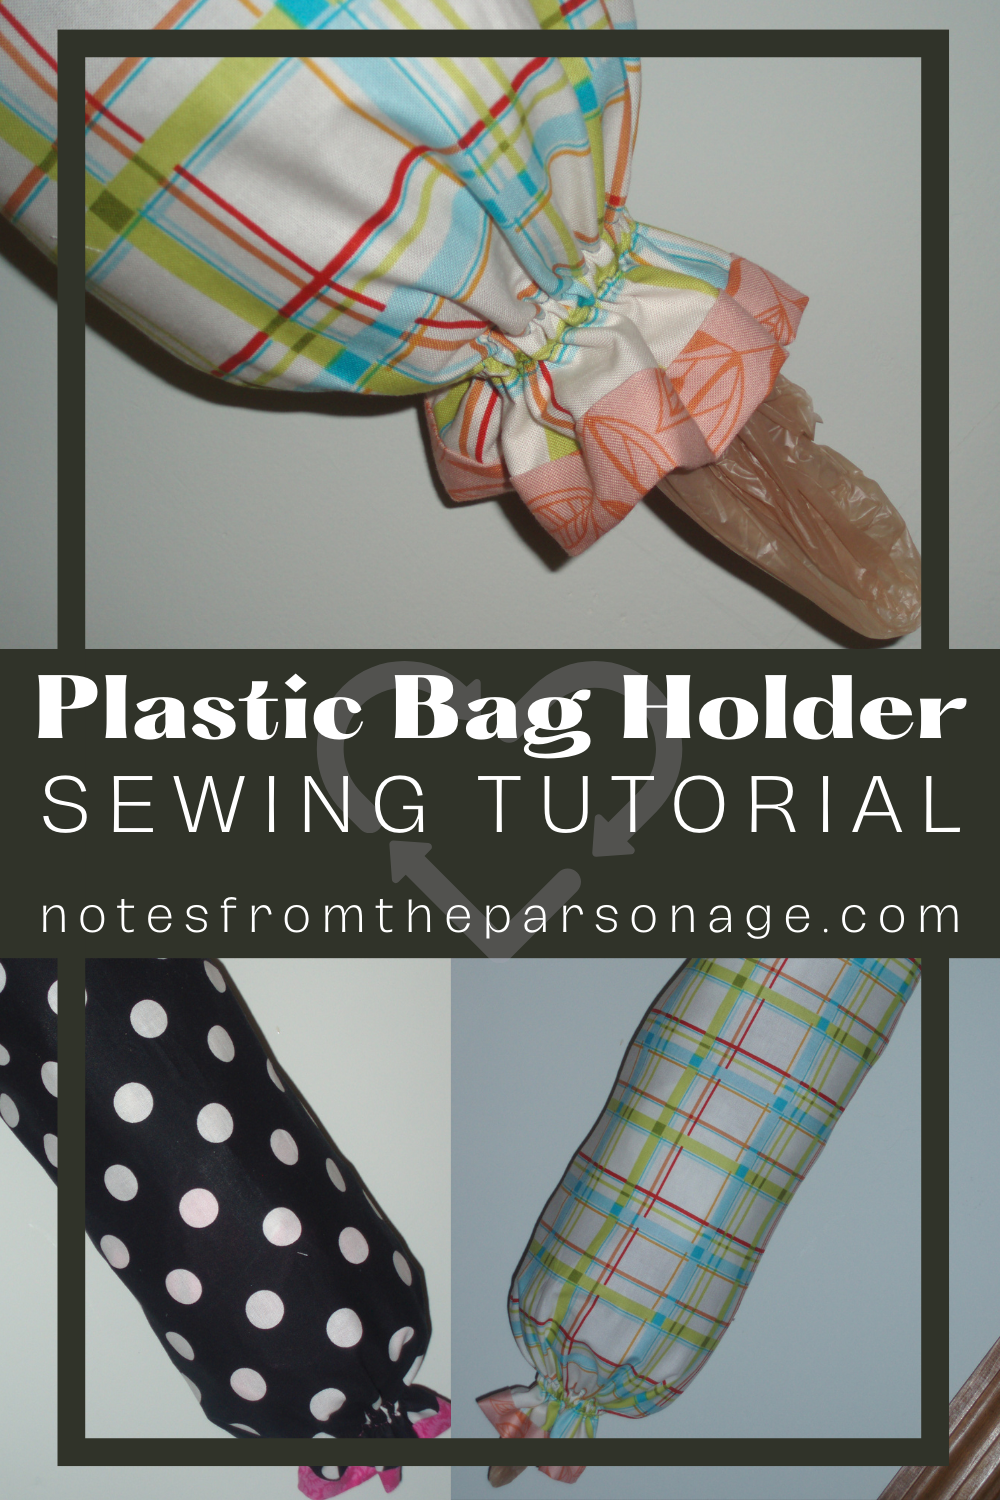 Image collage of finished plastic bag holders with "plastic bag holder sewing tutorial" written in the middle.